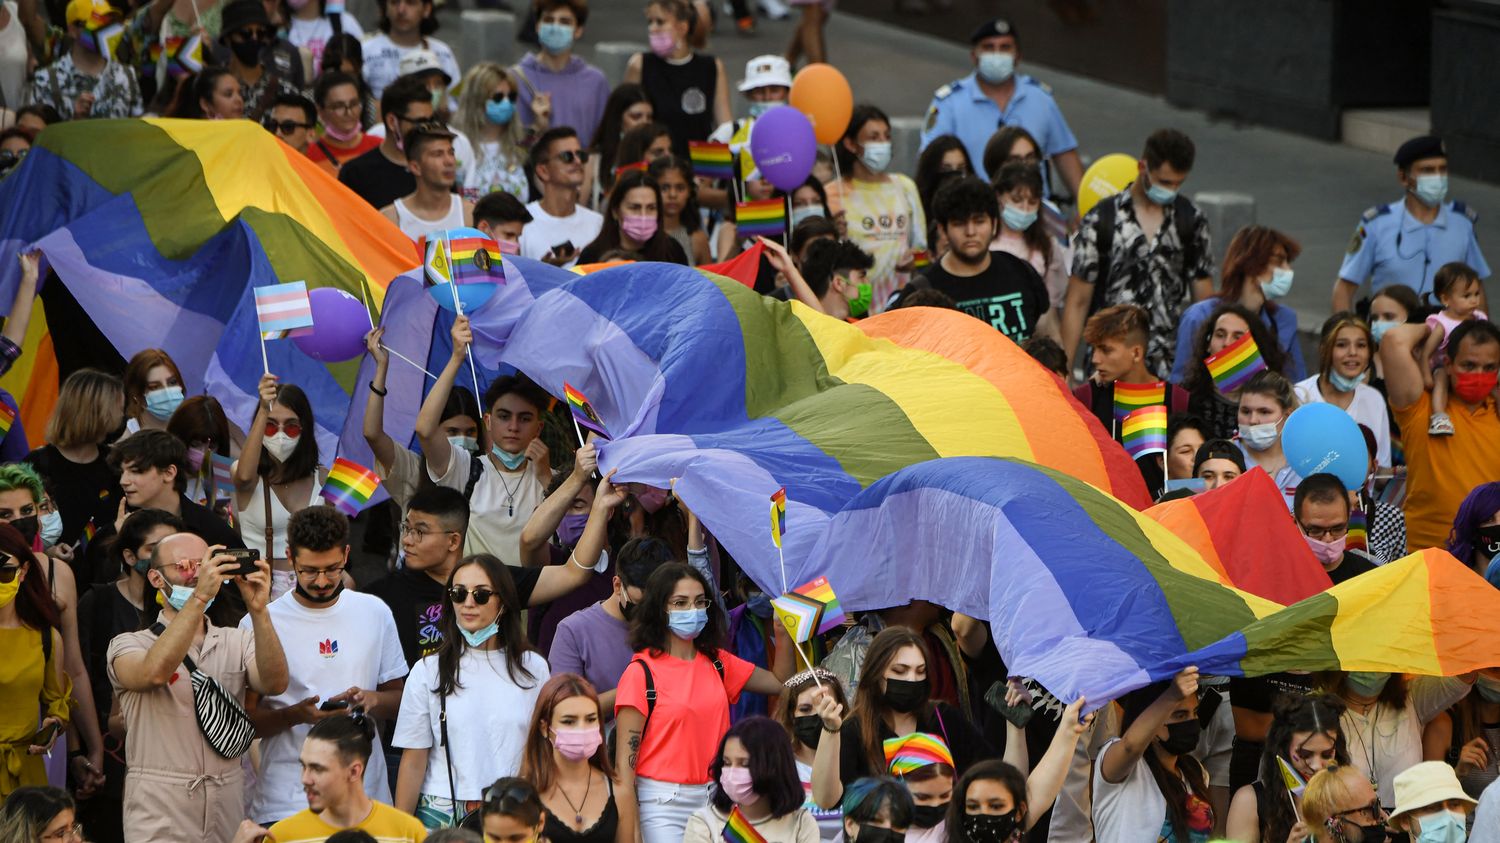 Romania condemned by the European Court of Human Rights for its refusal to recognize the unions of same-sex couples
